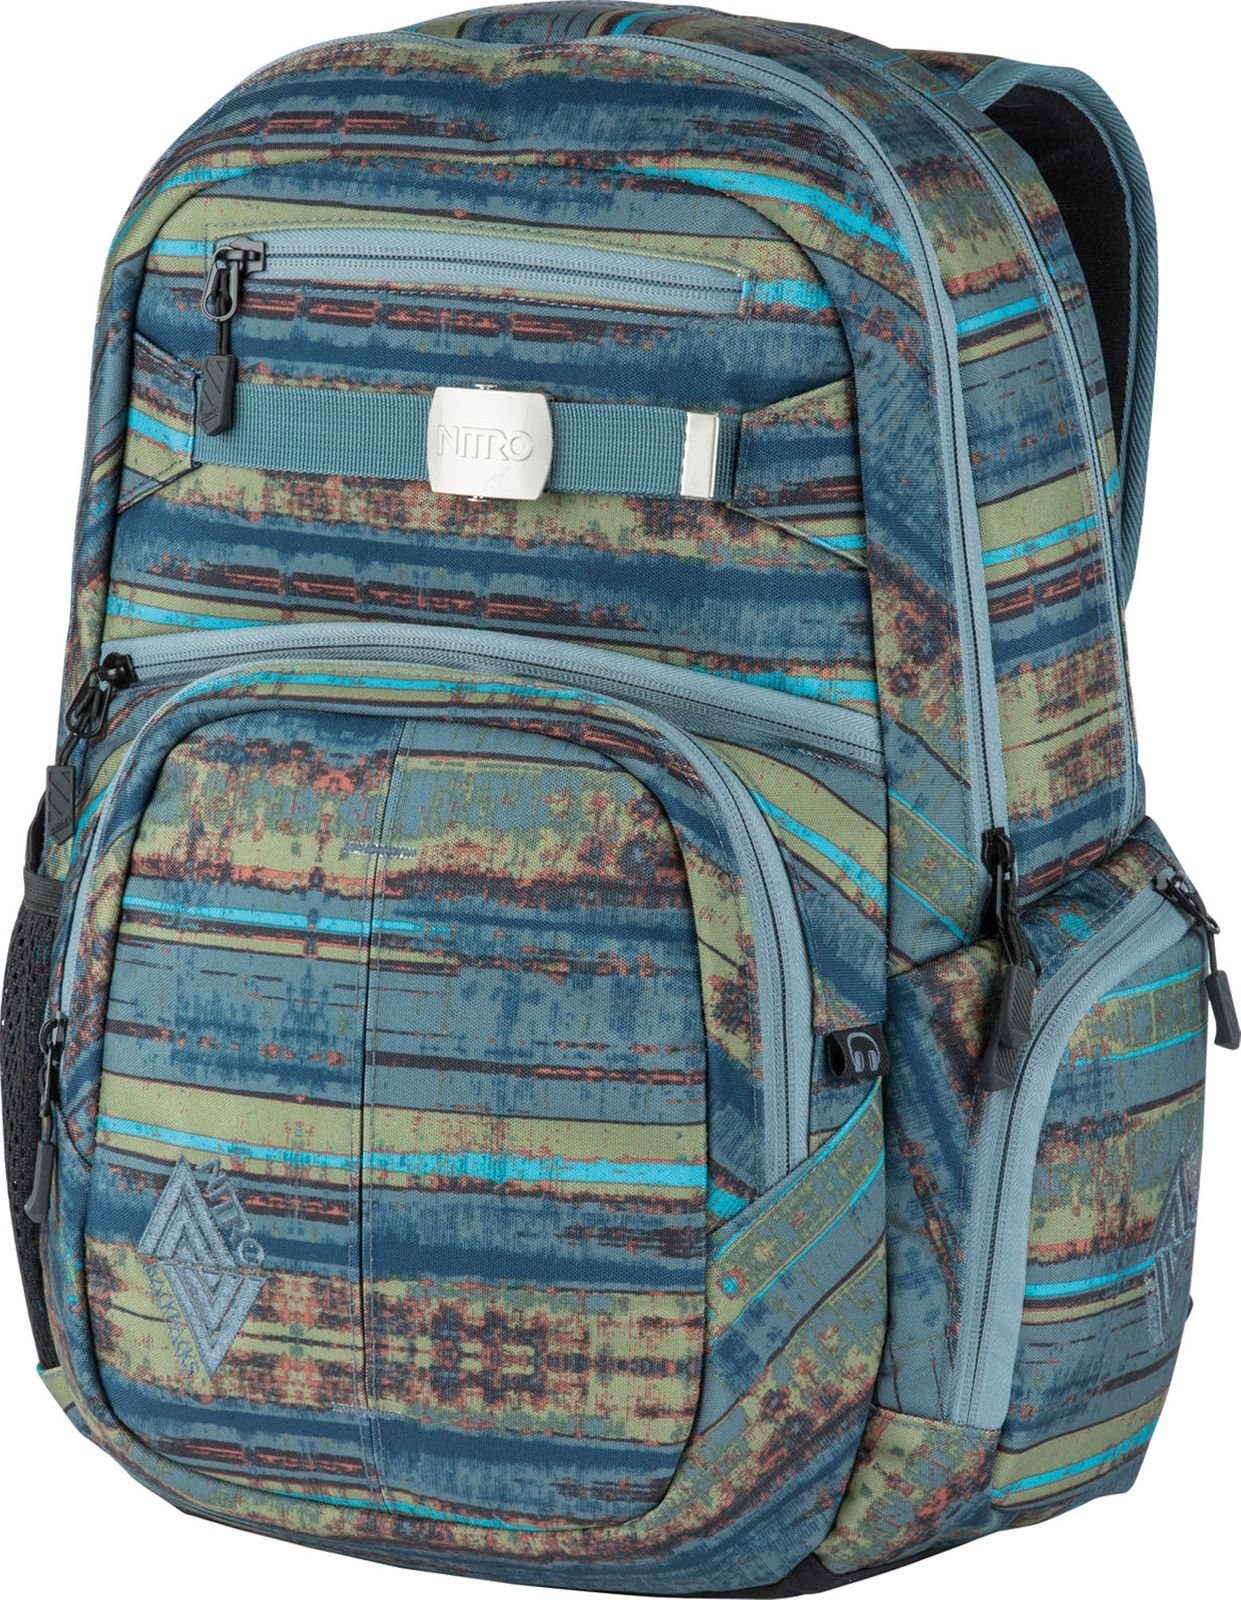 NITRO Rucksack Daypacker Collection Frequency Blue